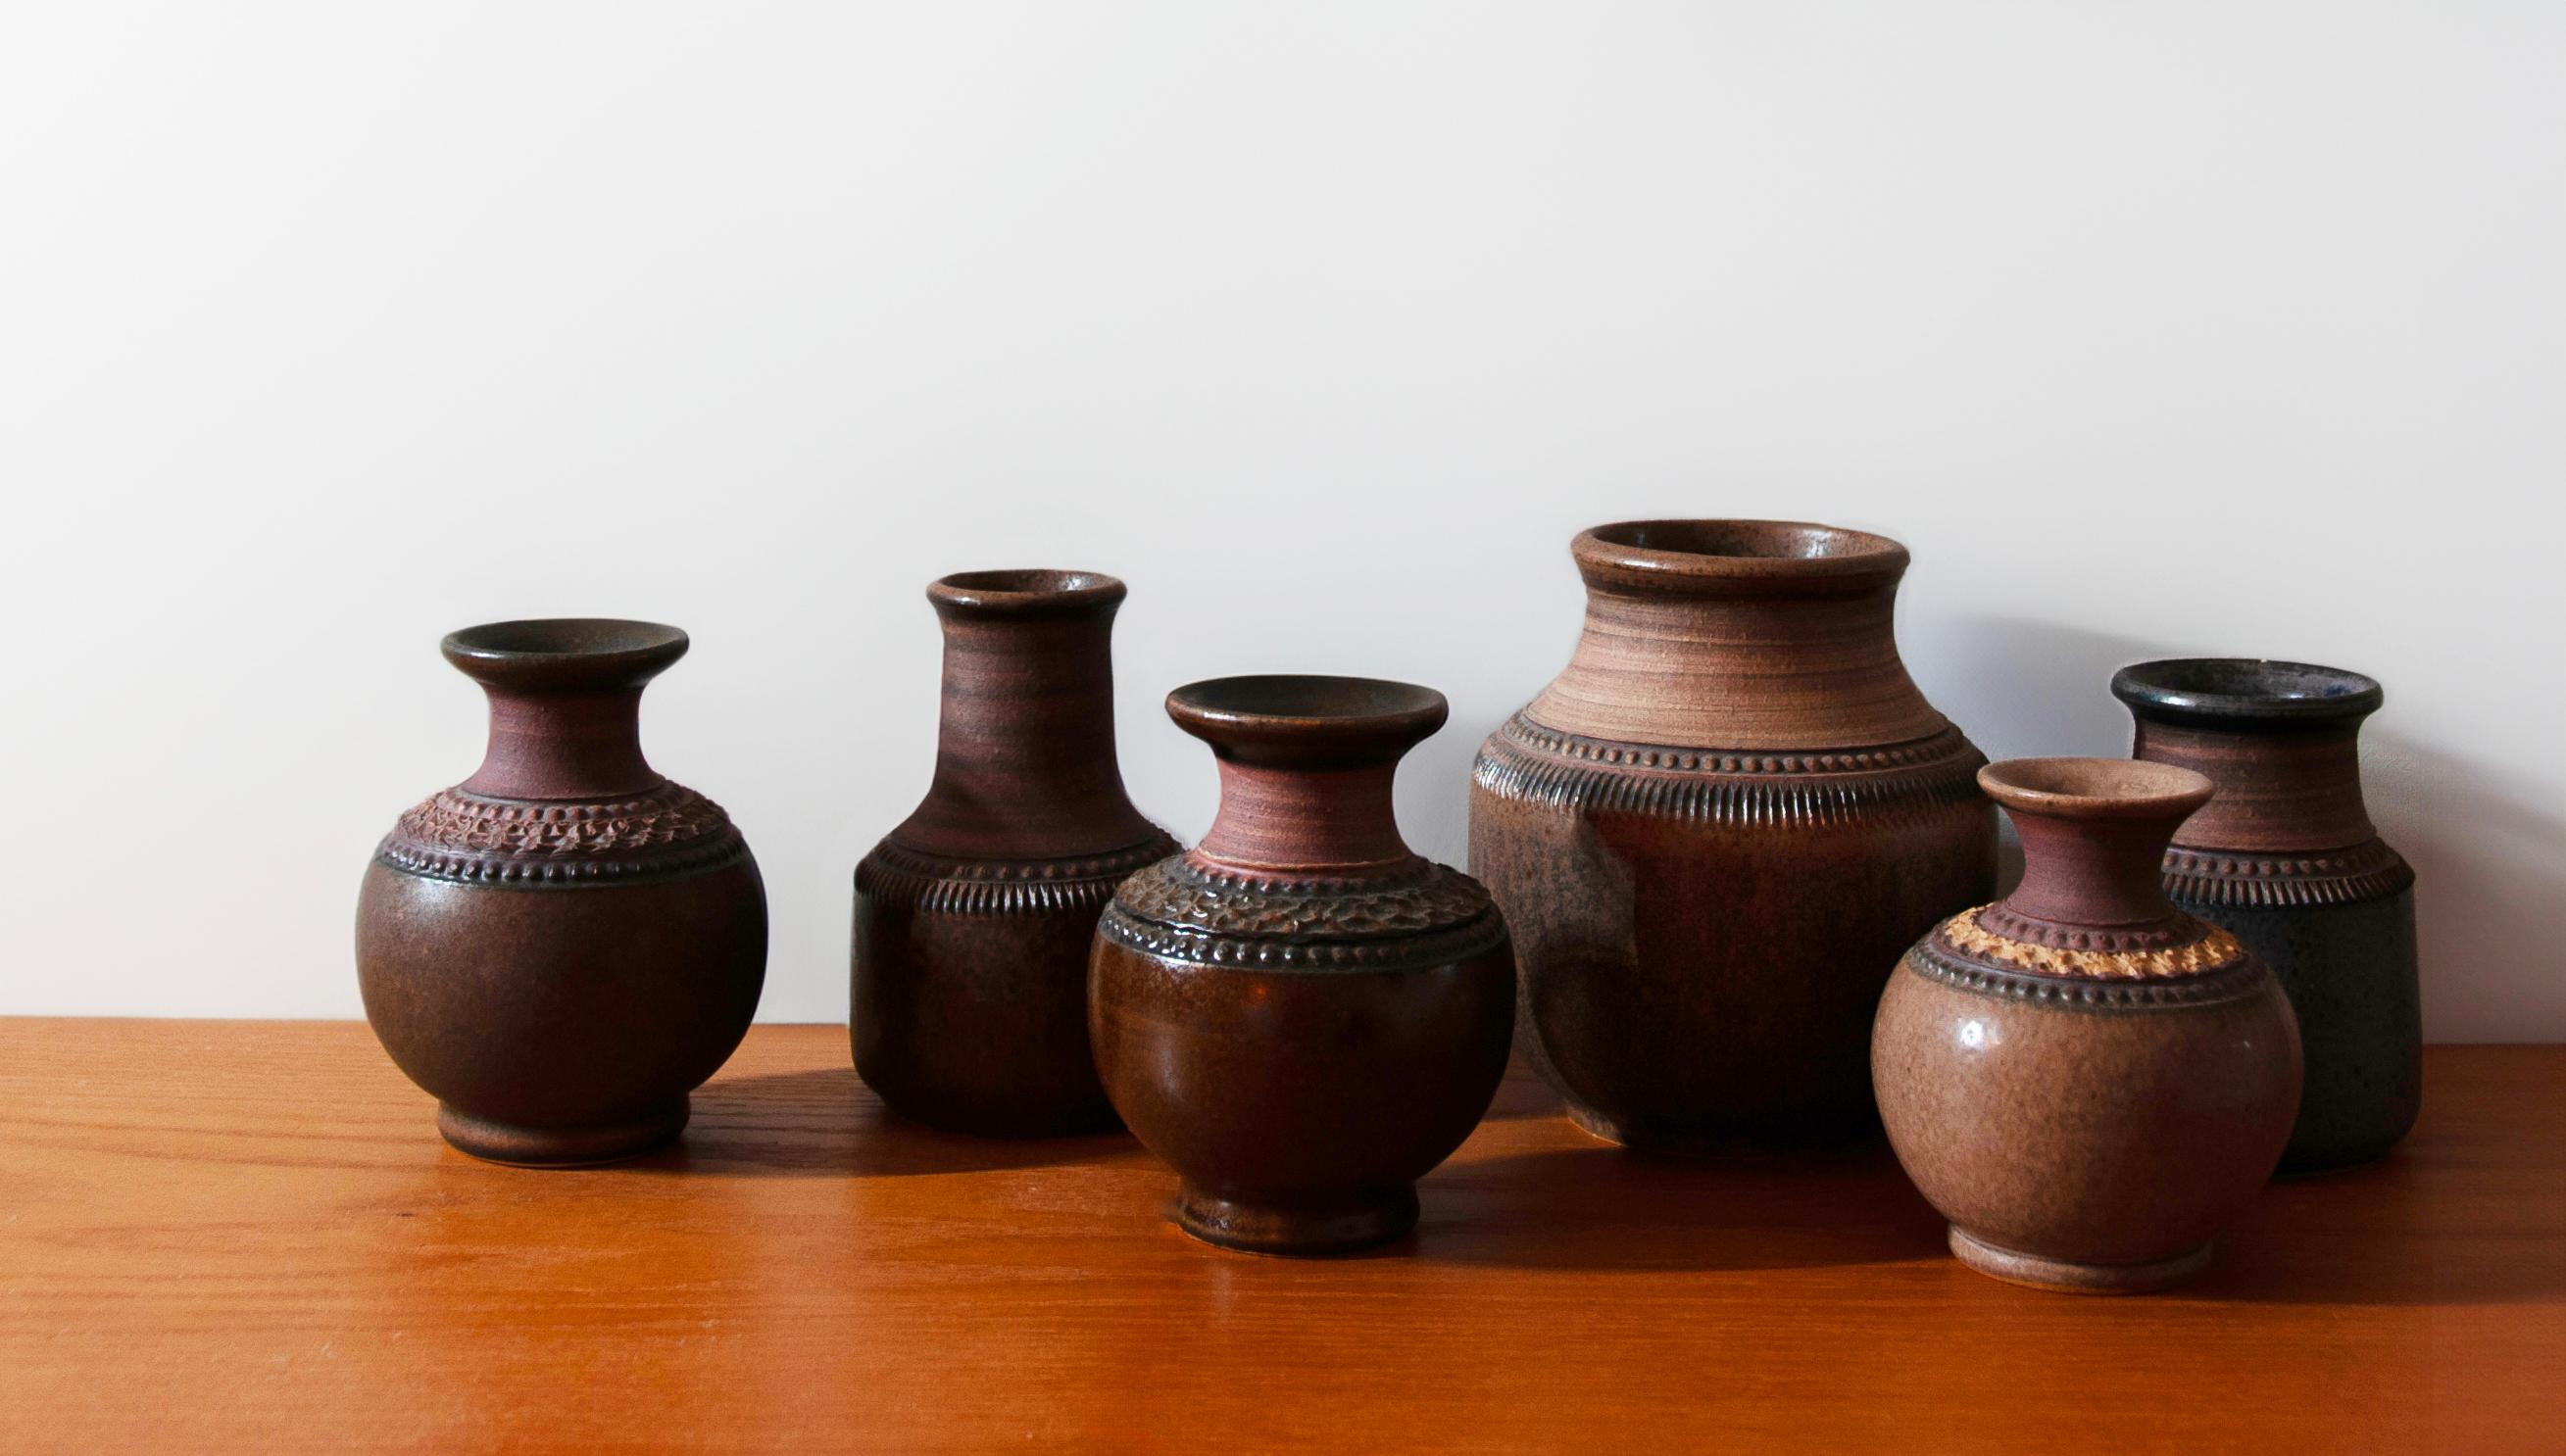 Explore an exceptional collection of handmade ceramic vases from the iconic manufacturer Klase Keramik Höganäs, crafted with love and craftsmanship in the 1960s!

Product Description:
This collection of 15 vases is a vivid testament to Klase